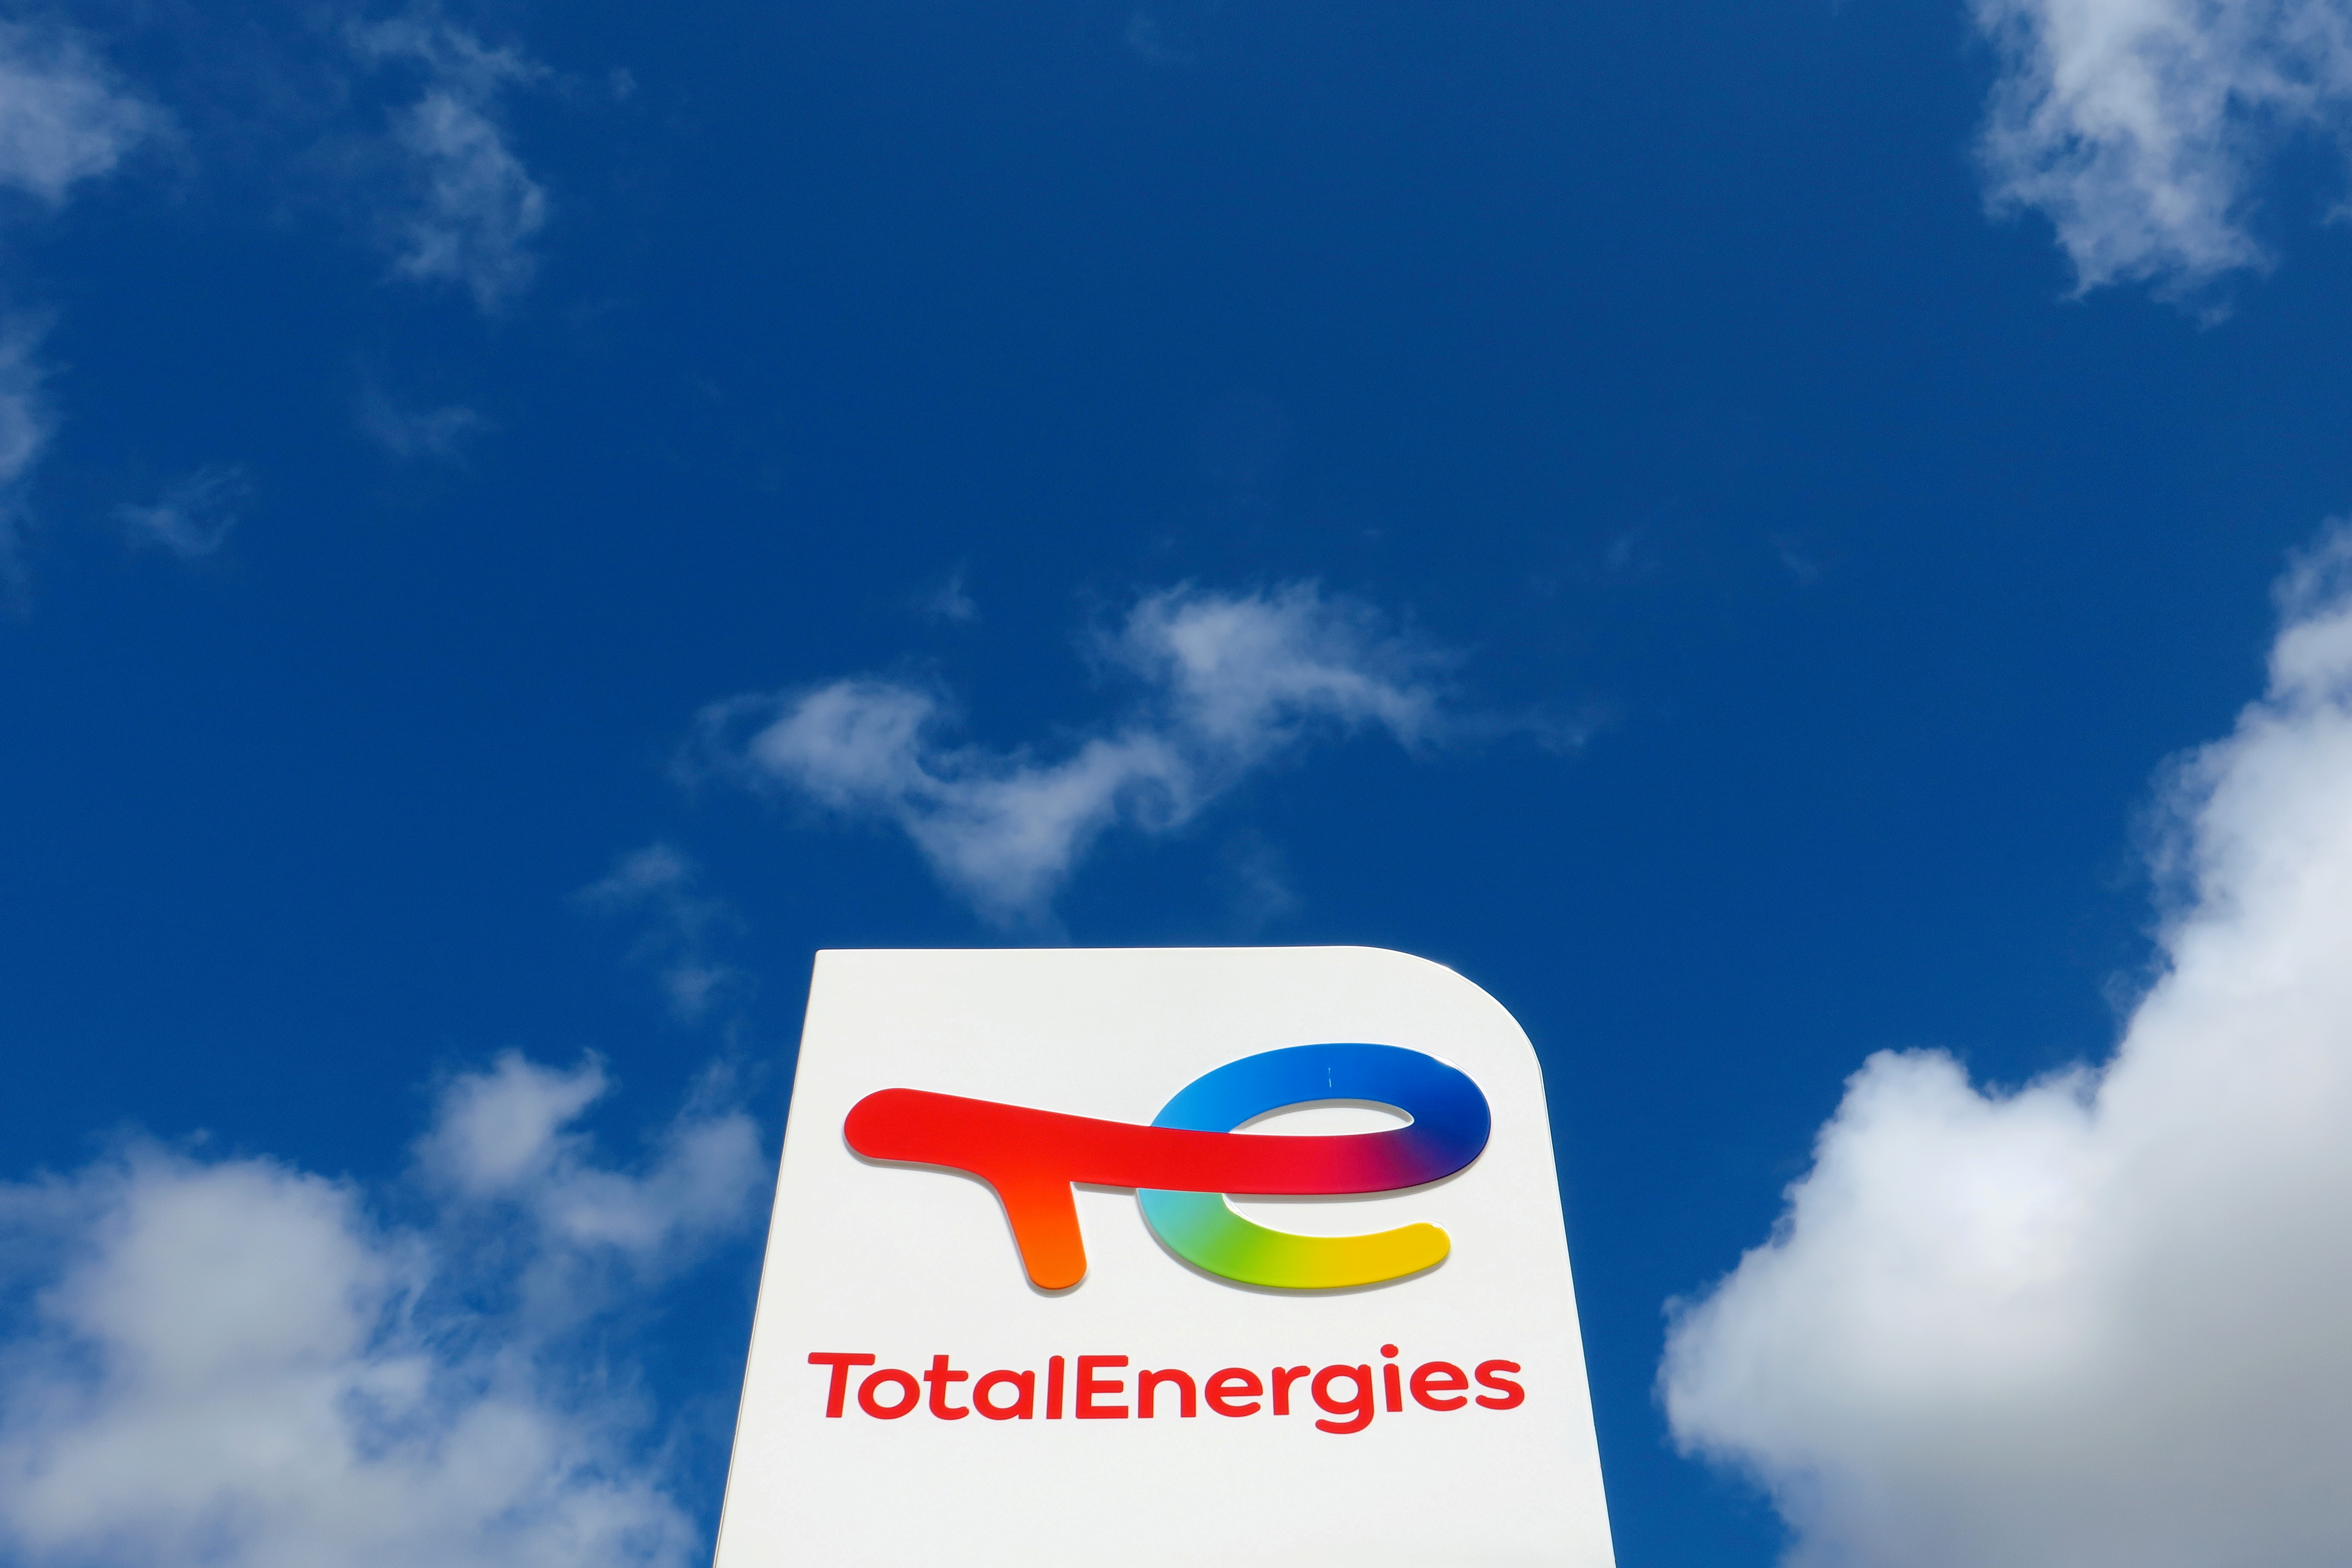 The logo of French oil and gas company TotalEnergies is seen at a petrol station in Ressons, France, August 6, 2021. REUTERS/Pascal Rossignol